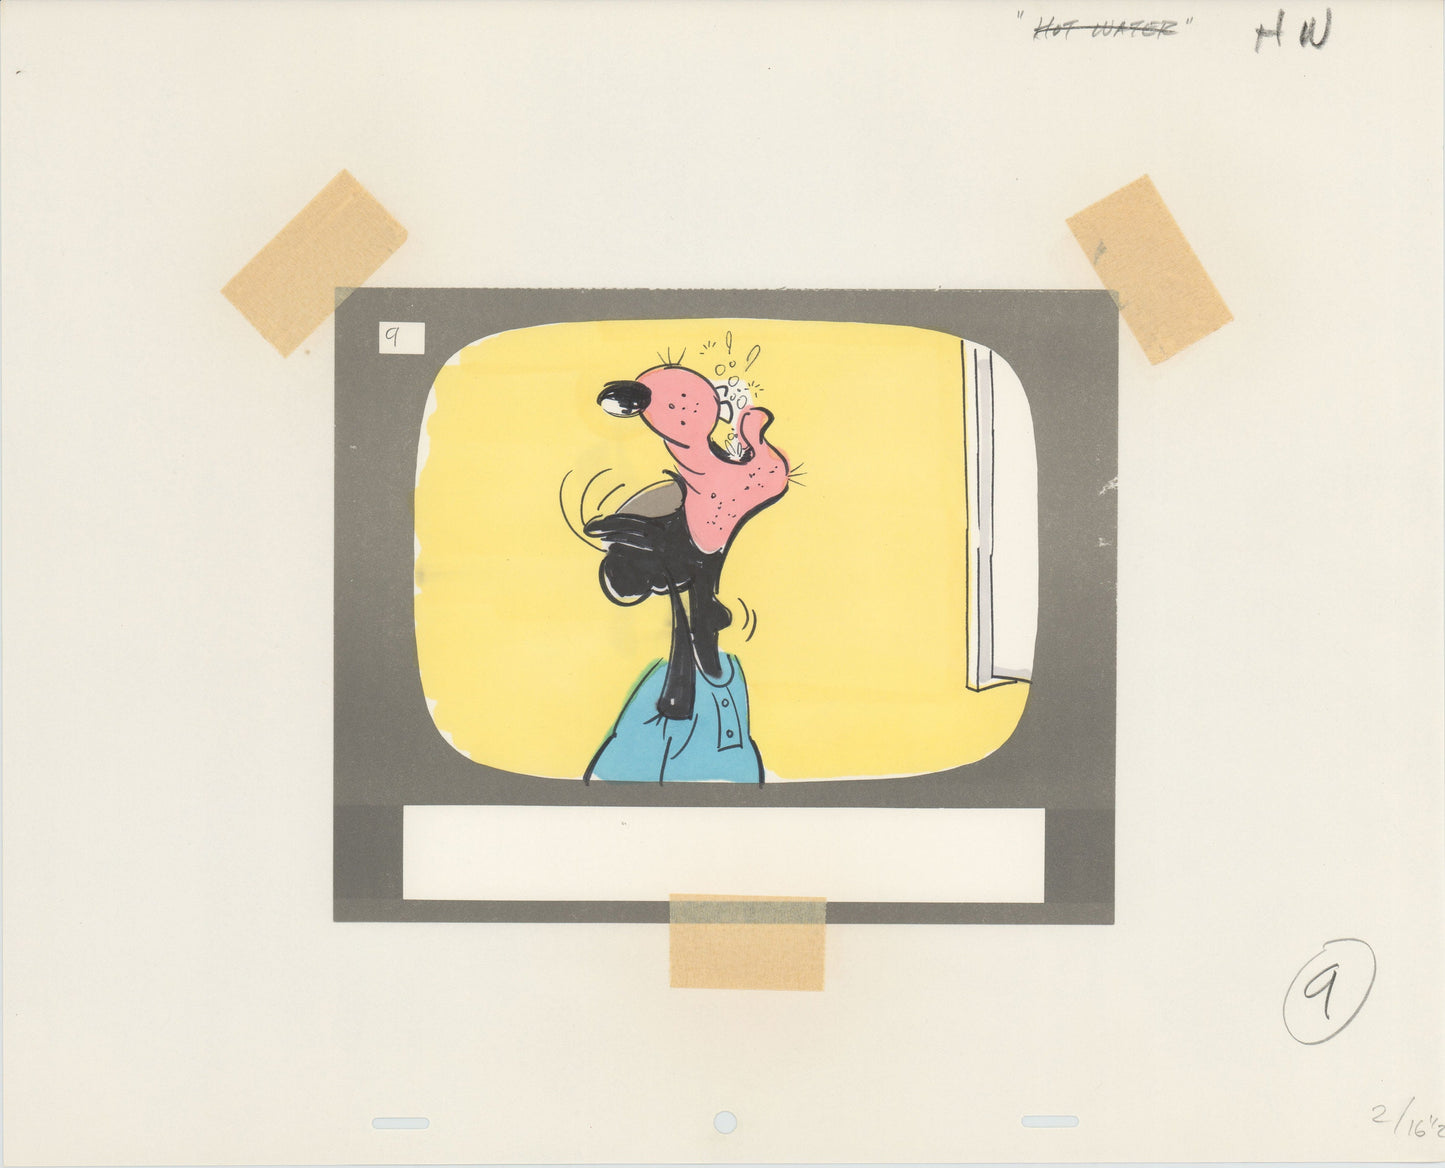 Goofy Willie Ito Hand-drawn Walt Disney Production Animation Storyboard 1970's or 1980's 198 from "Hot Water" Filmstrip